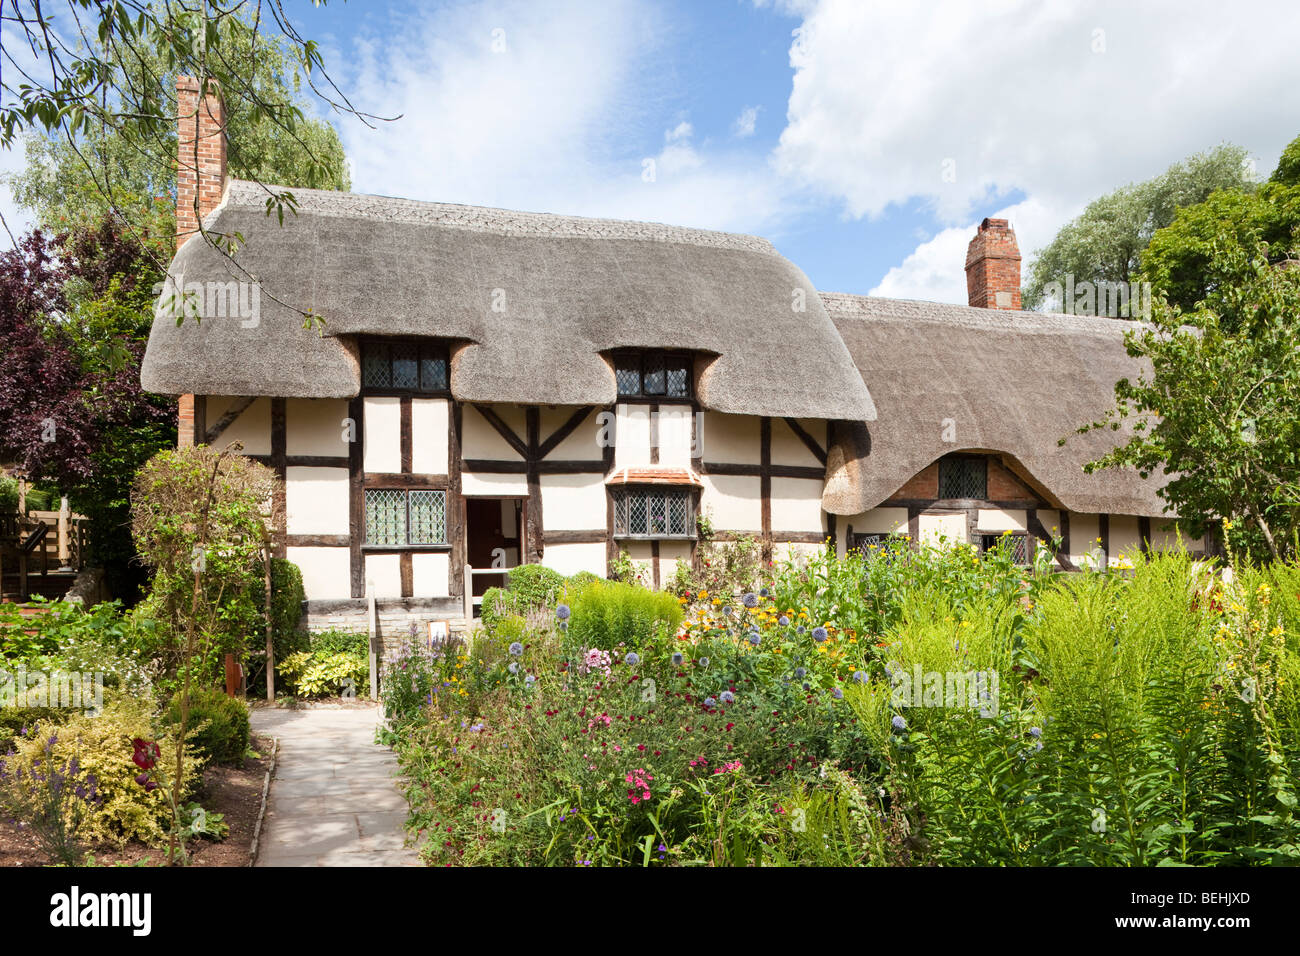 Anne Hathaway's Cottage, Shottery, Stratford upon Avon, Warwickshire UK - Anne was the wife of William Shakespeare. Stock Photo